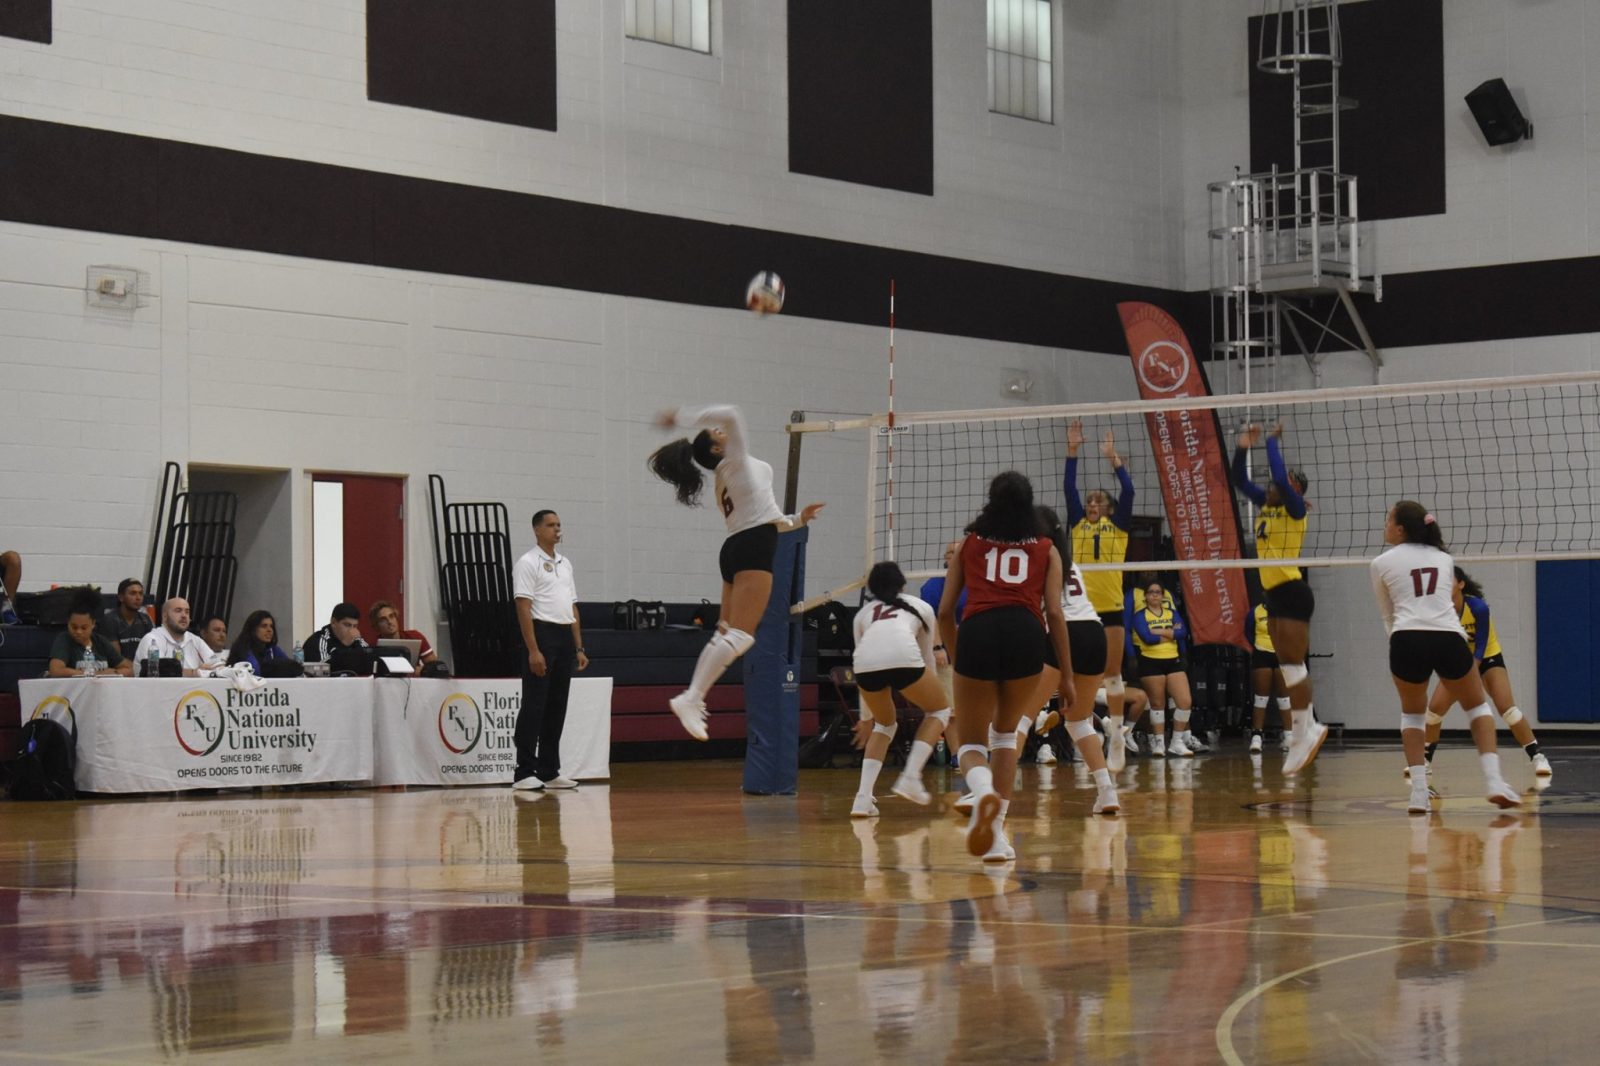 Fnu Volleyball Player Attacking the ball and opponents trying to block